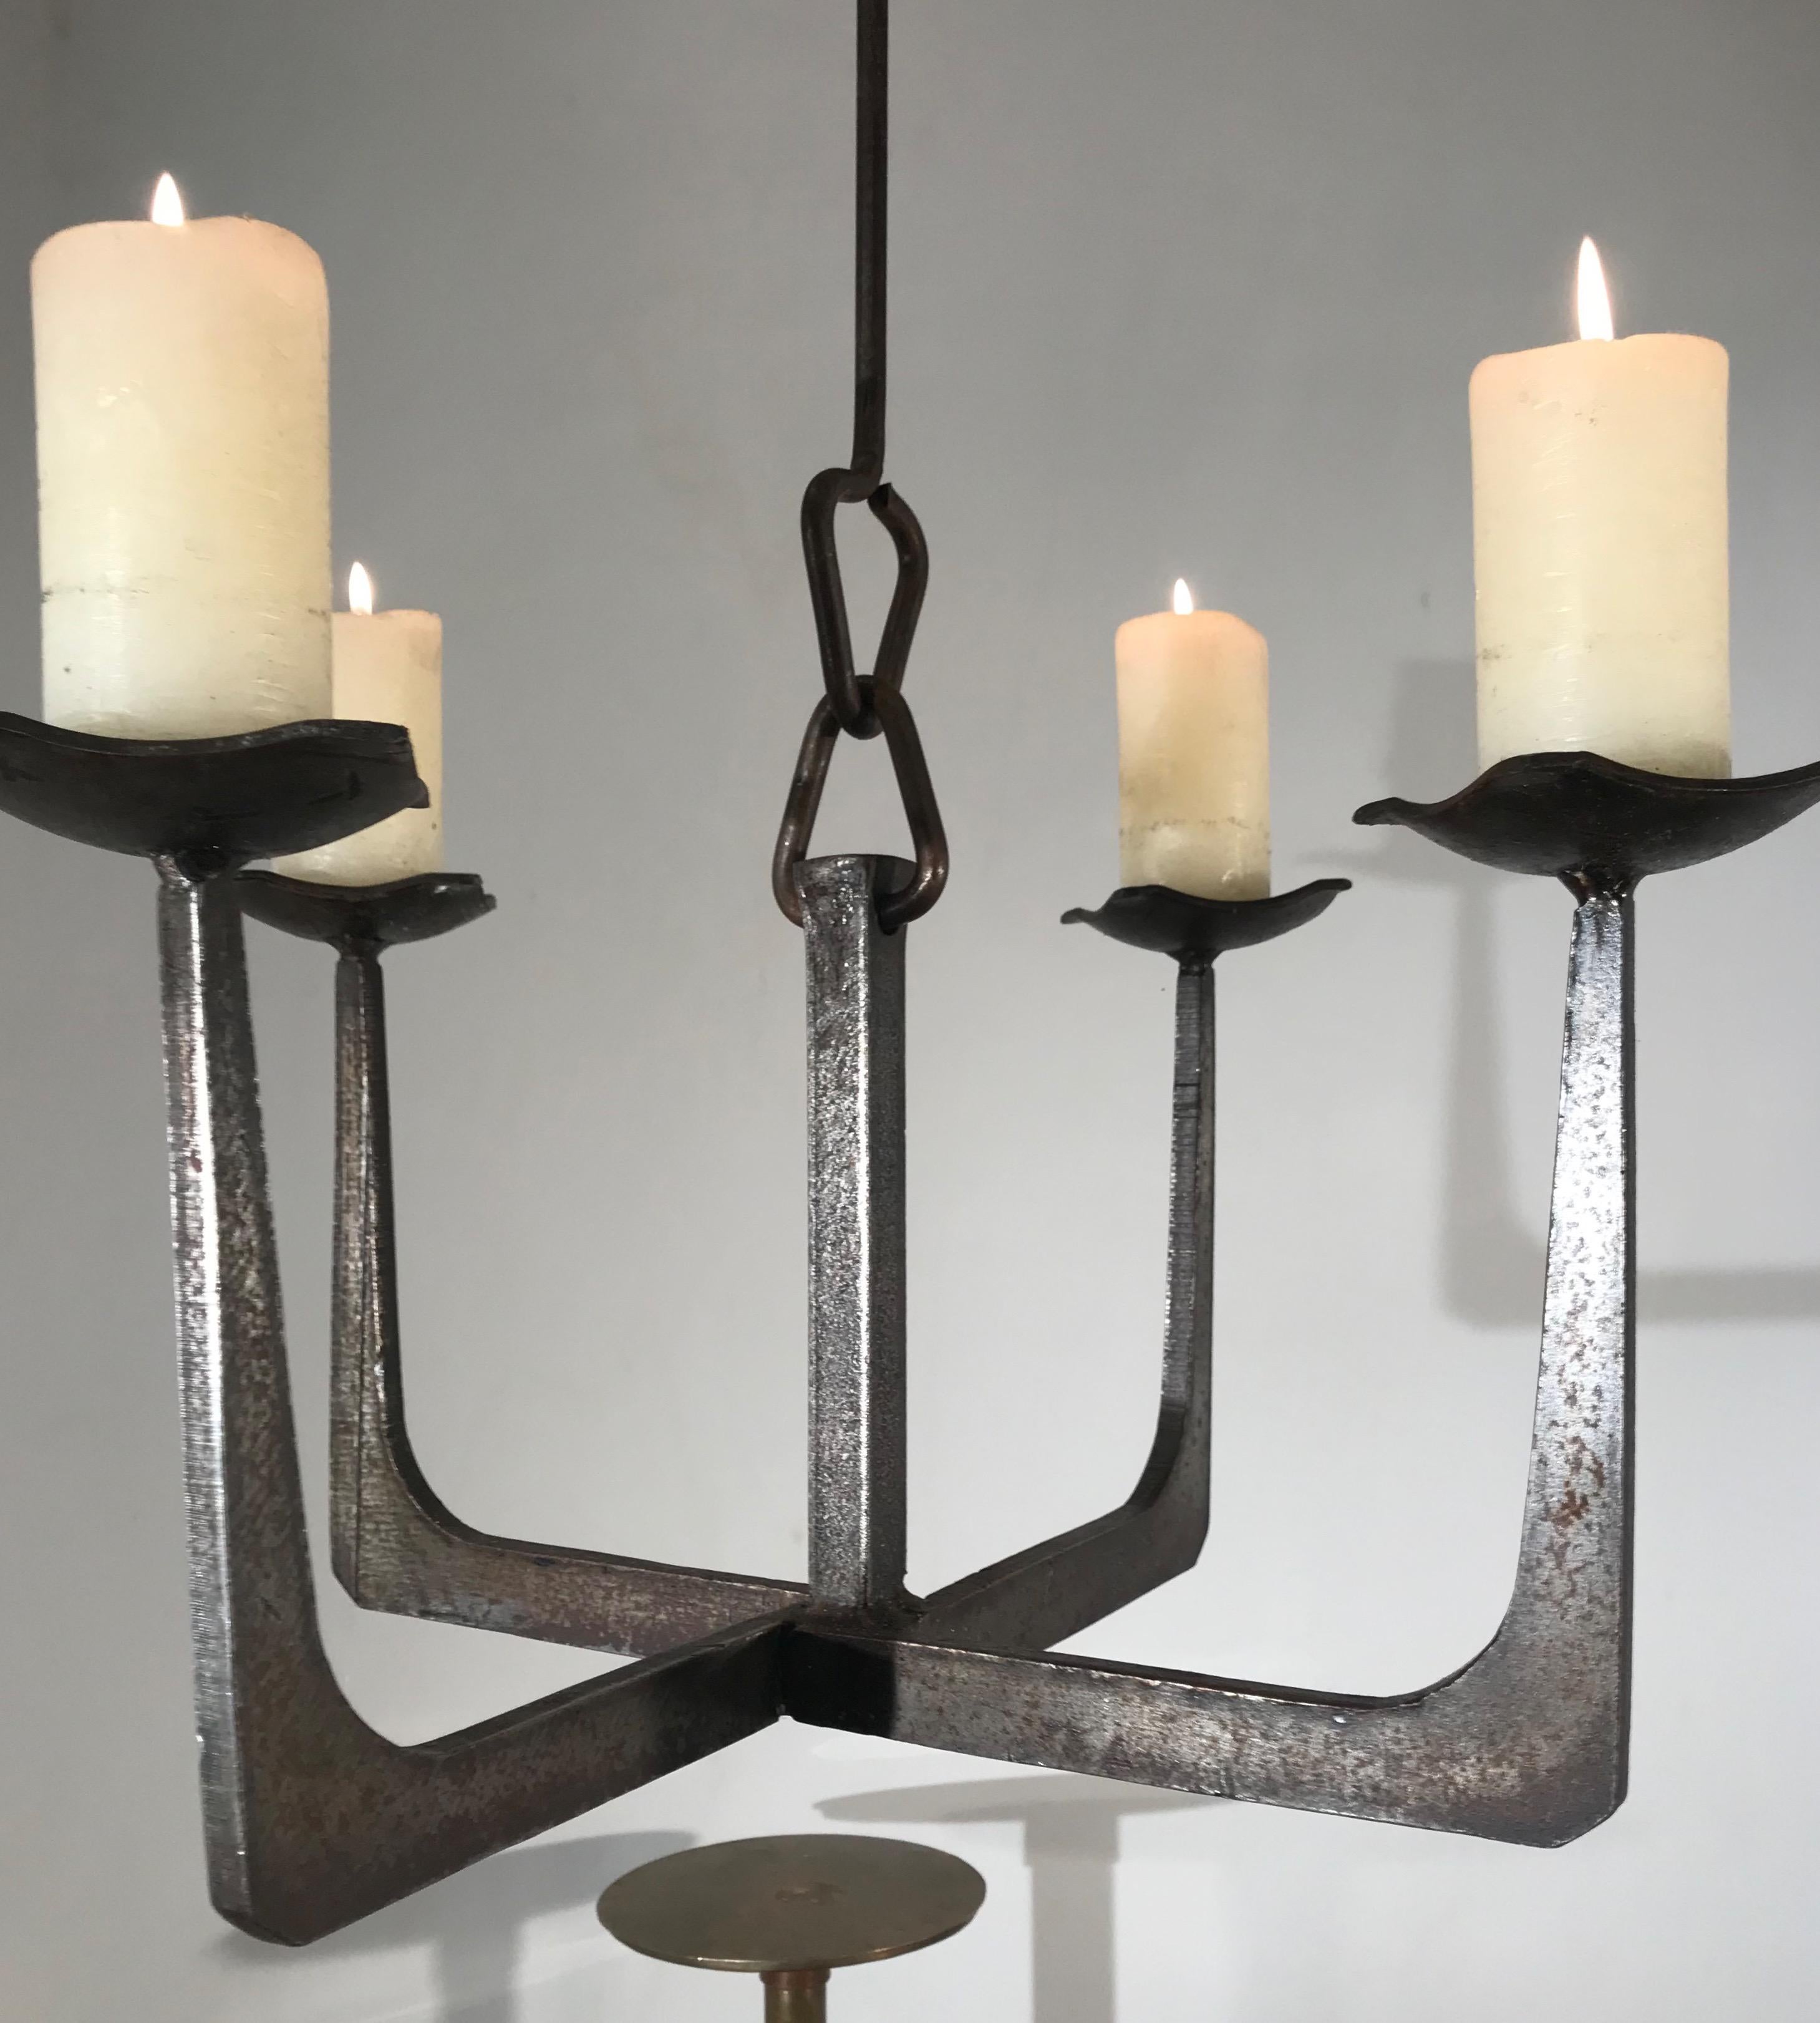 European Early 20th Century Arts & Crafts Wrought Iron Candle Lamp Four Candle Chandelier